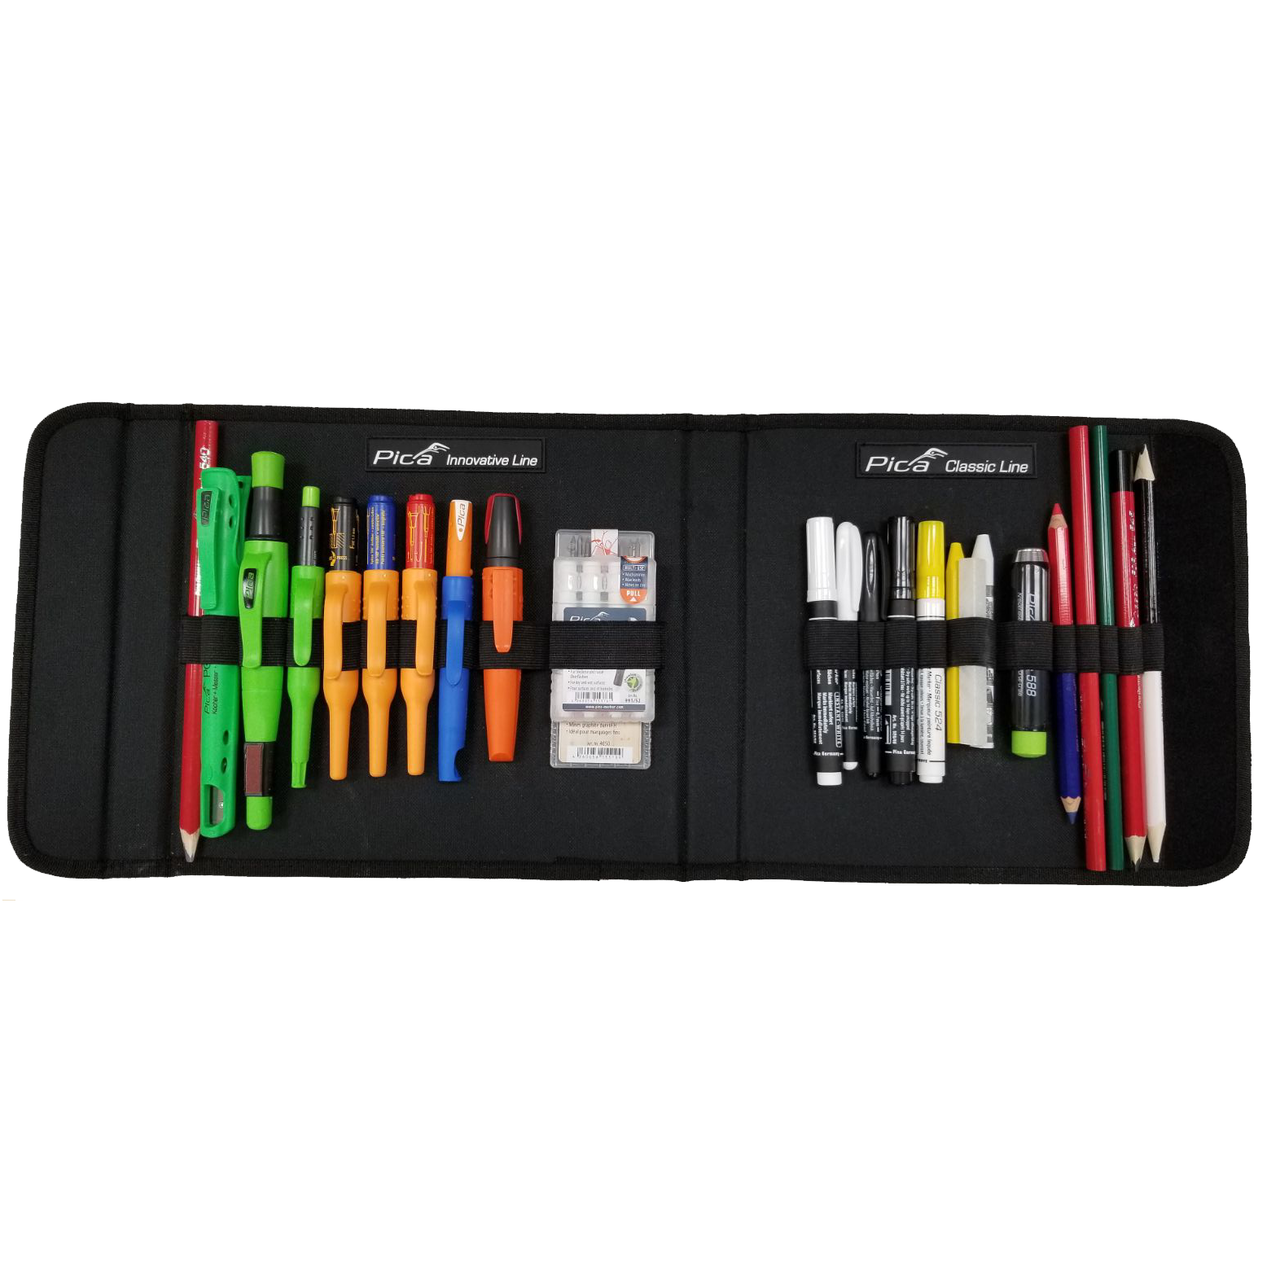 Pica 30407 Dry Long-life Construction Marker Blister Bundle with Special  Summer Leads Refill Set.